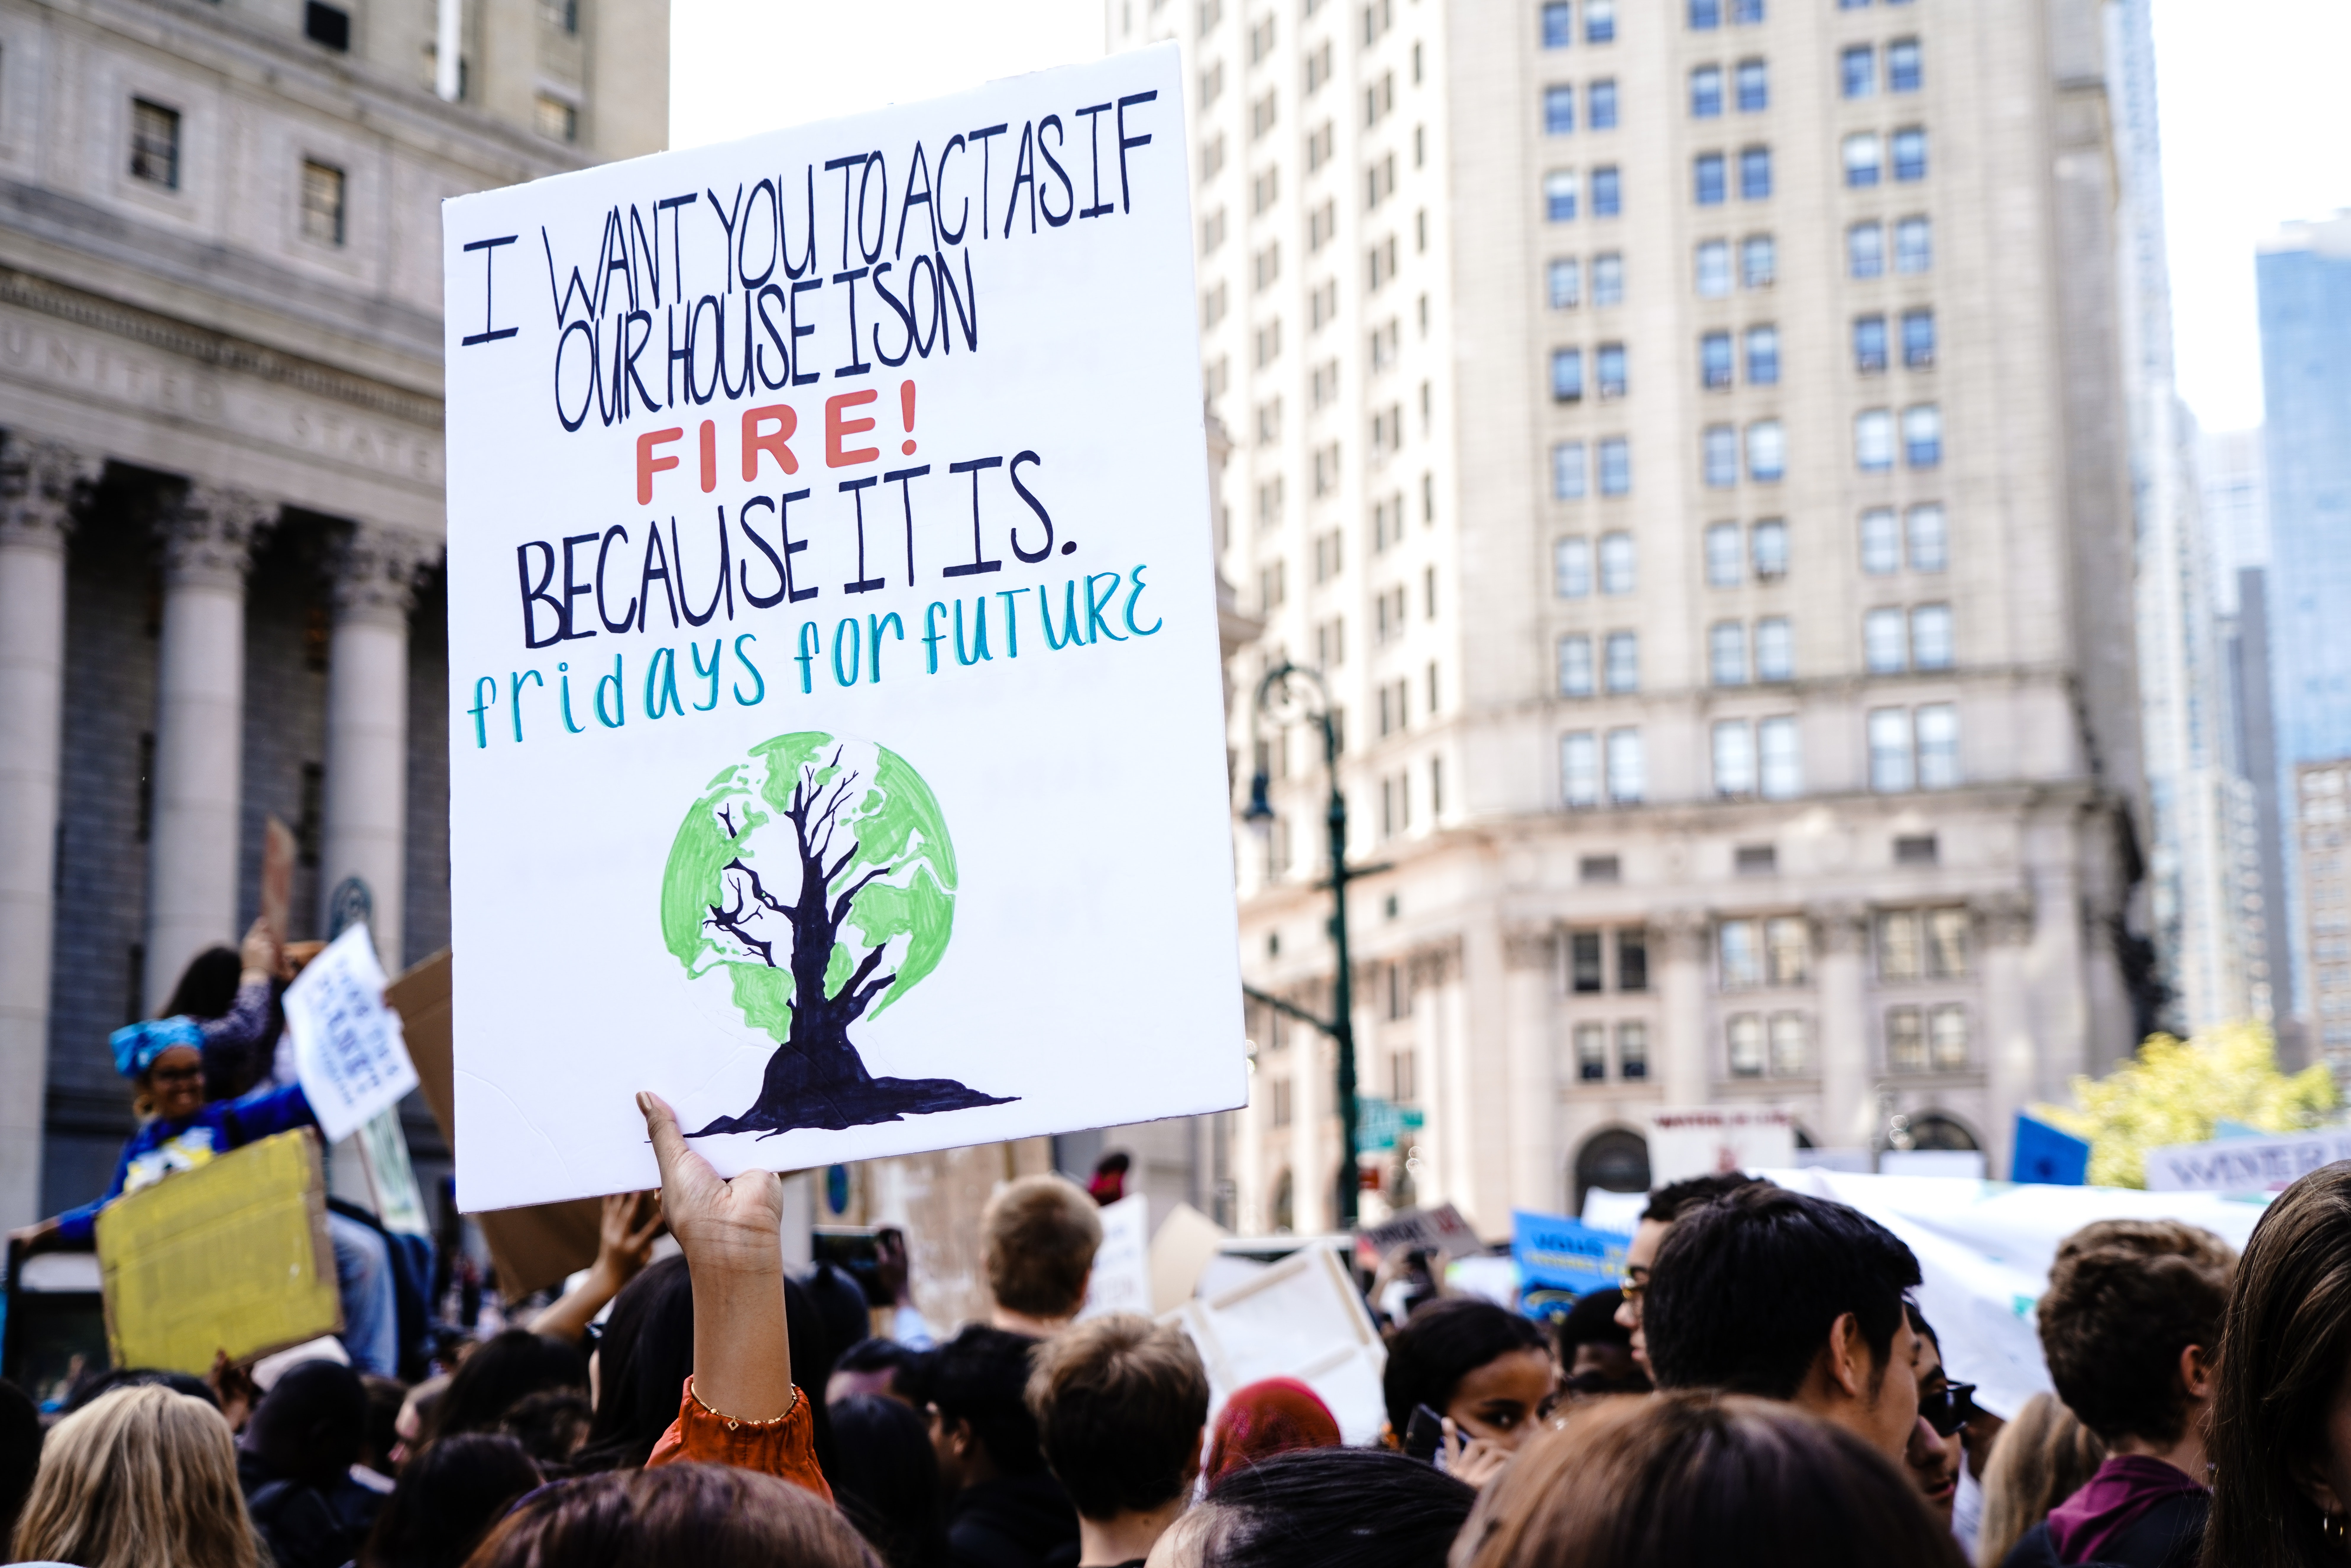 5 ways businesses can take action to reduce environmental racism